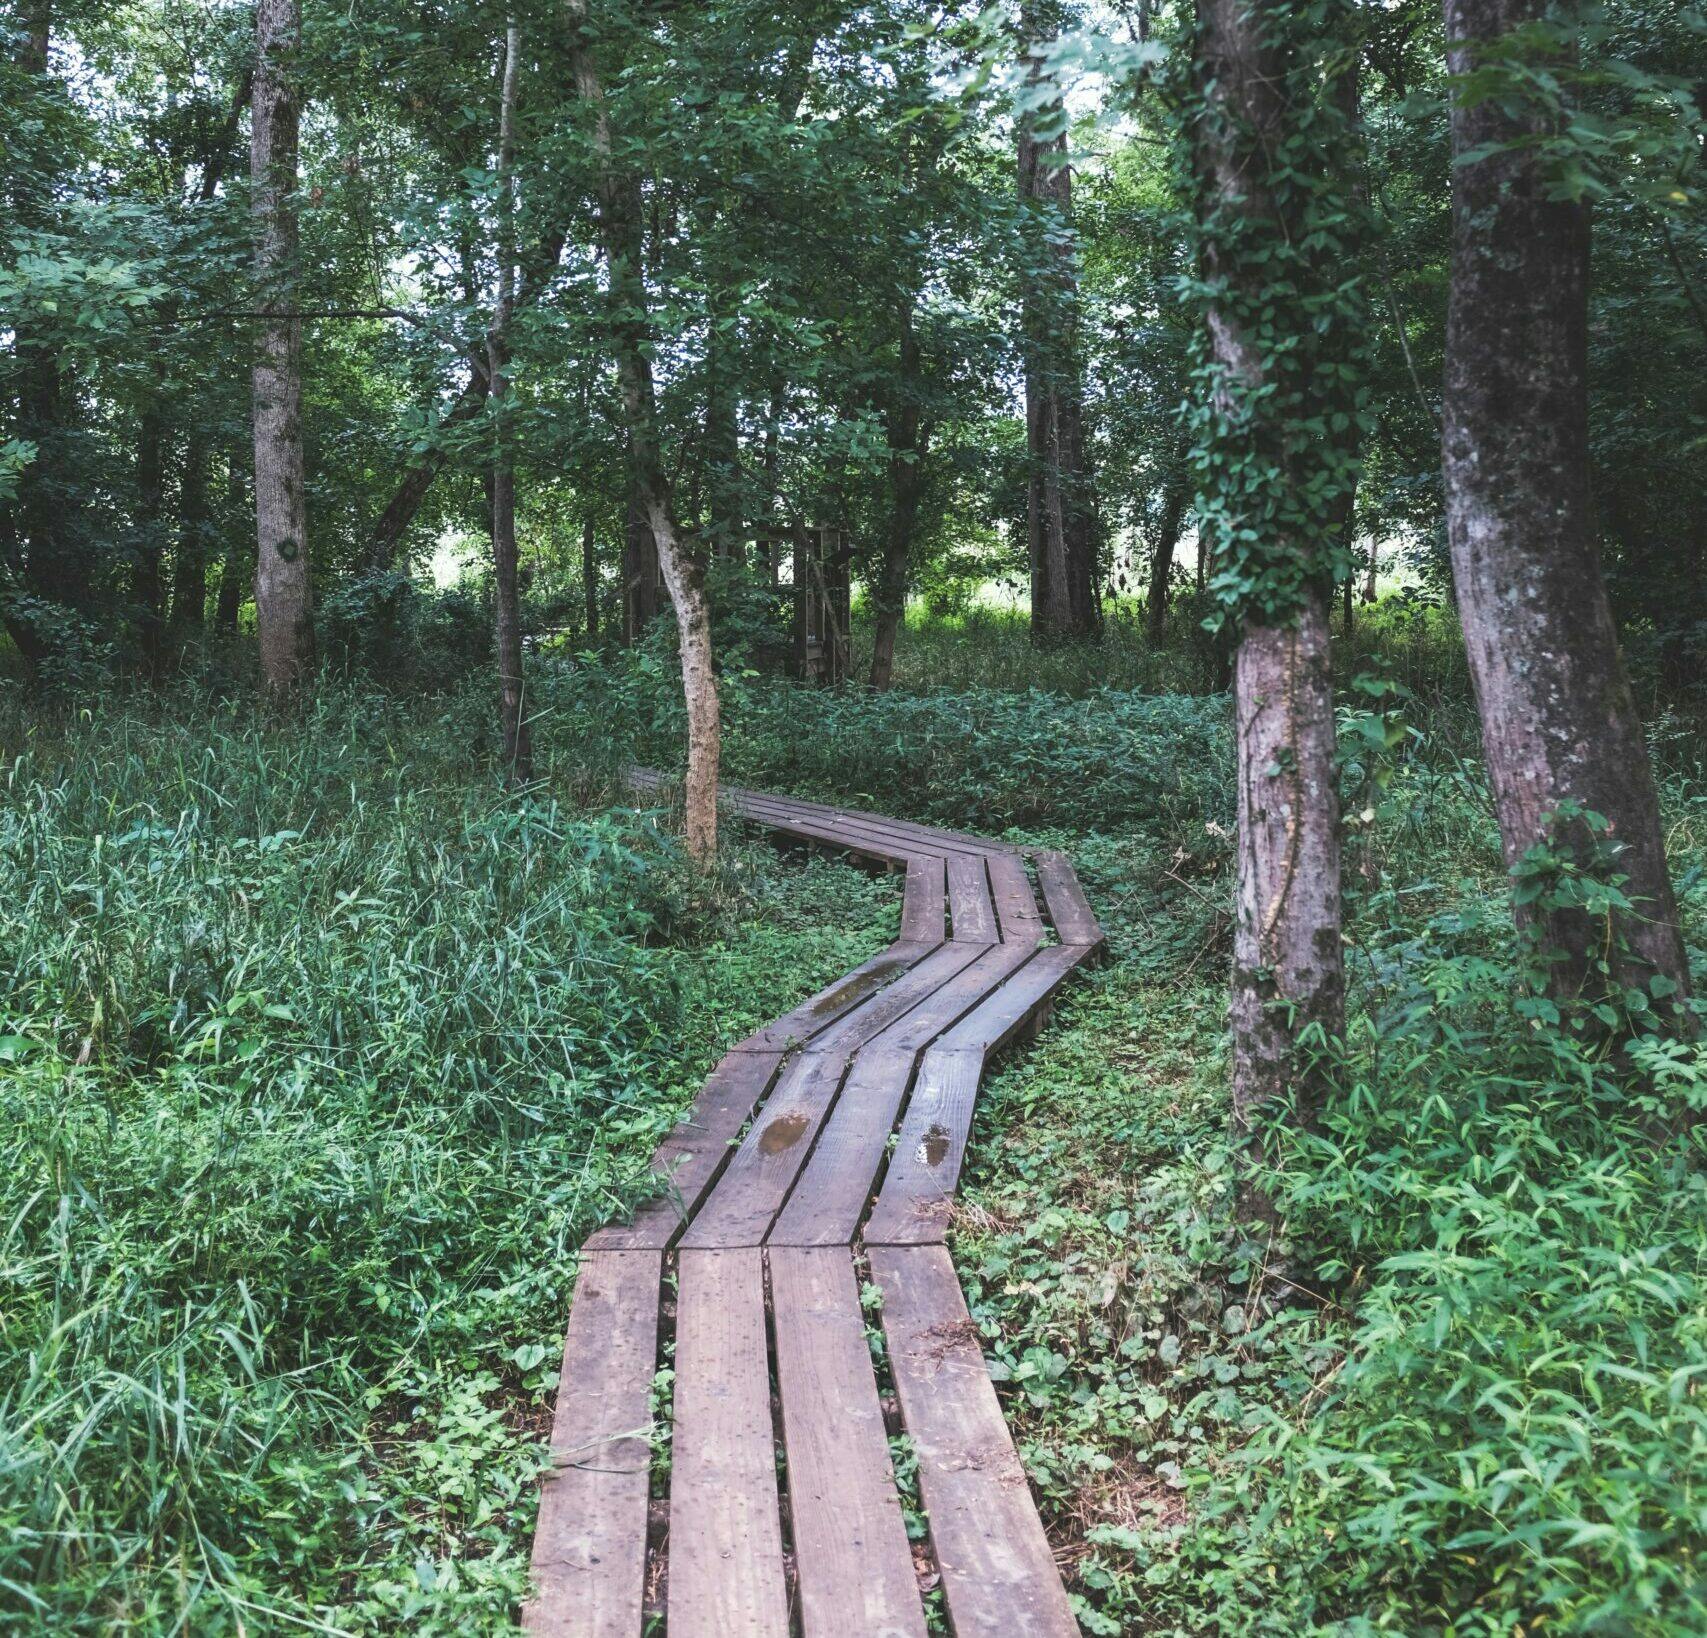 Wooden plank pathway through forest